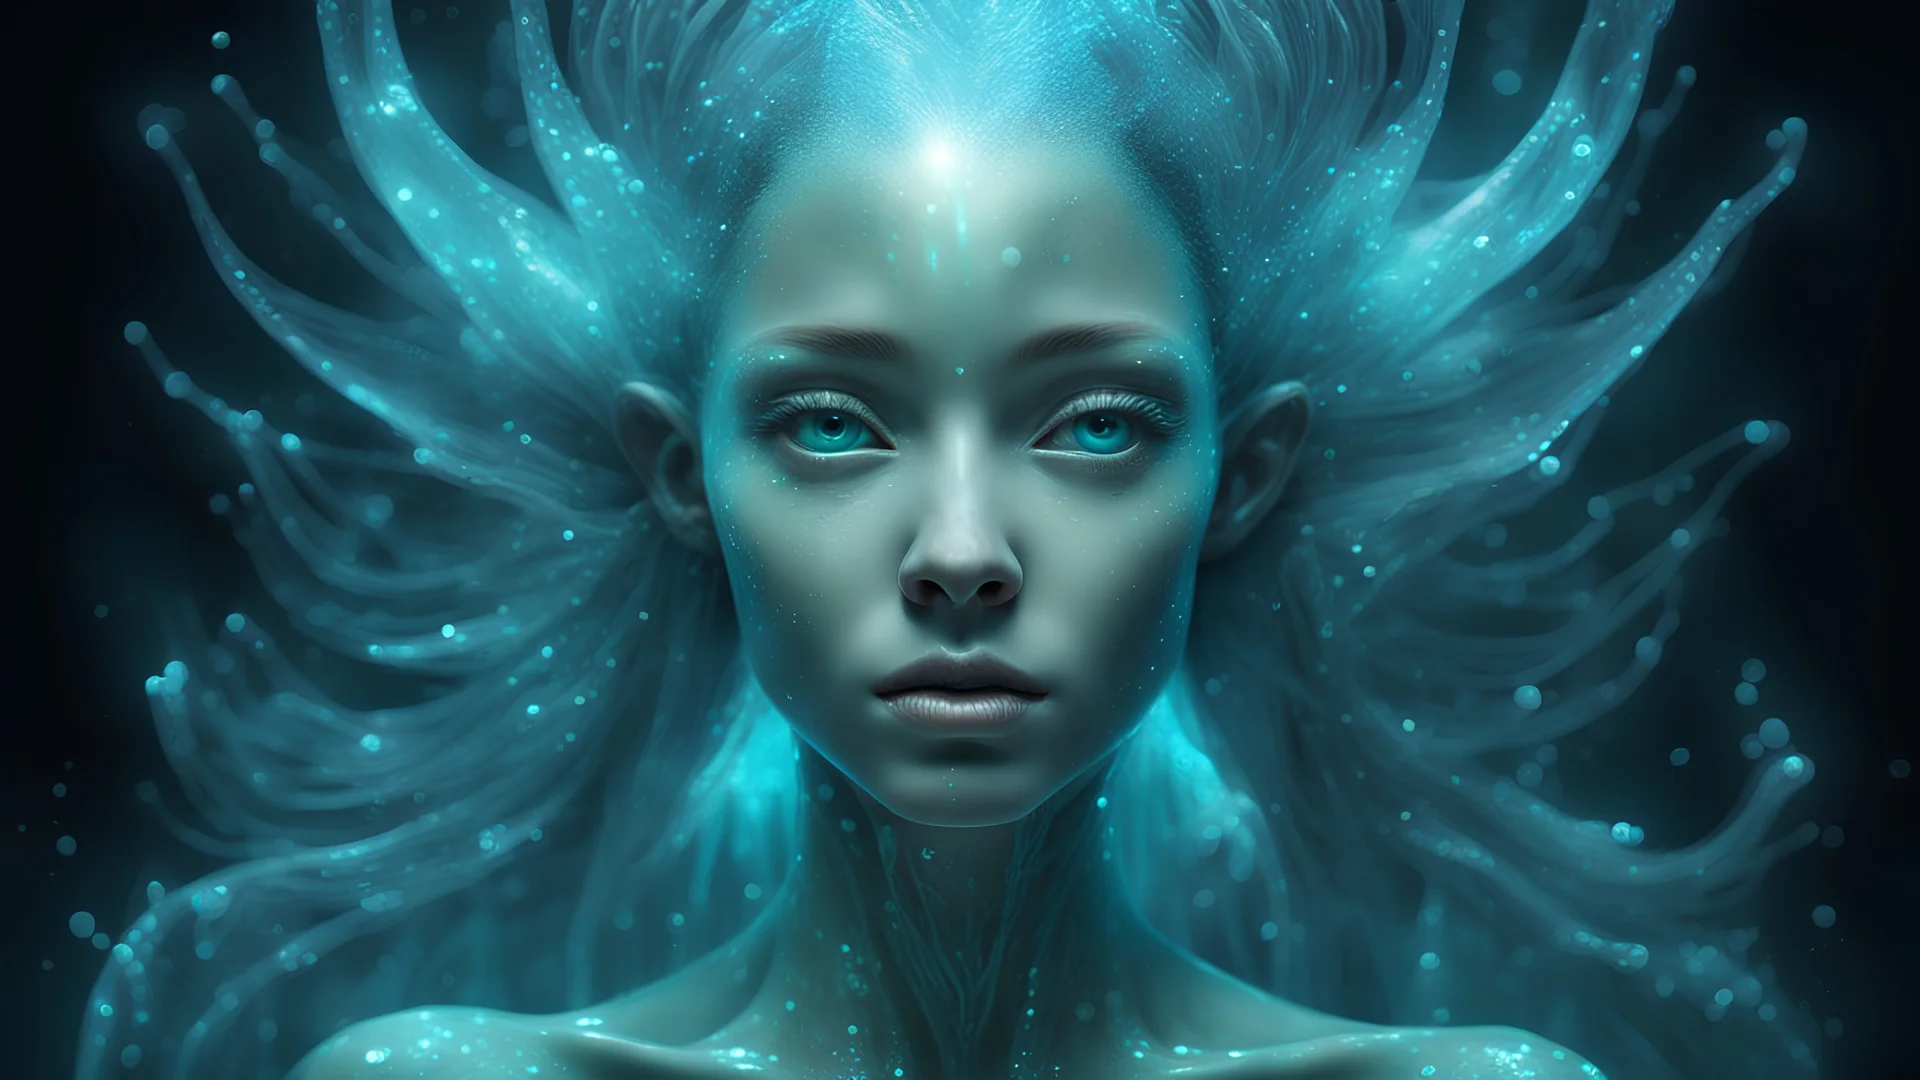 A Photograph with bioluminescent and bioluminous artistic style portrays a divine mermaid alien humanoid. A curvy model front facing with bioluminescent wet translucent irredescent skin etheral glowing eyes, large head fins and ear fins flowing showcases an alluring, perfect face in ultra-realistic detail. The composition imitates a cinematic movie, with dazzling, golden, and silver light effects. The intricate details, sharp focus, and crystal-clear skin create a highly detailed,